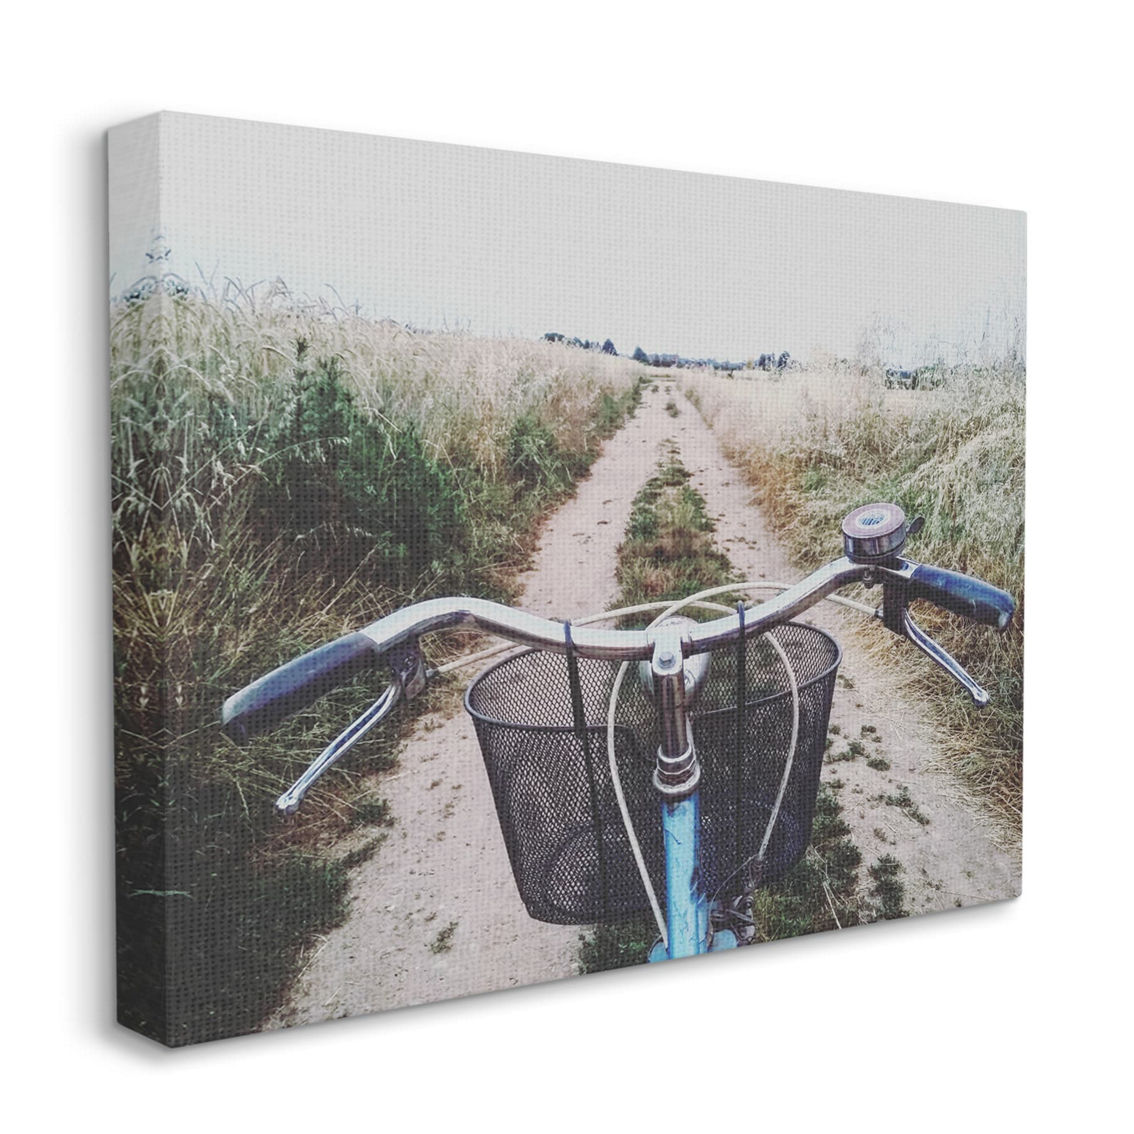 Stupell Canvas Wall Art Bicycle on Rural Path, 16 x 20 - Image 3 of 5